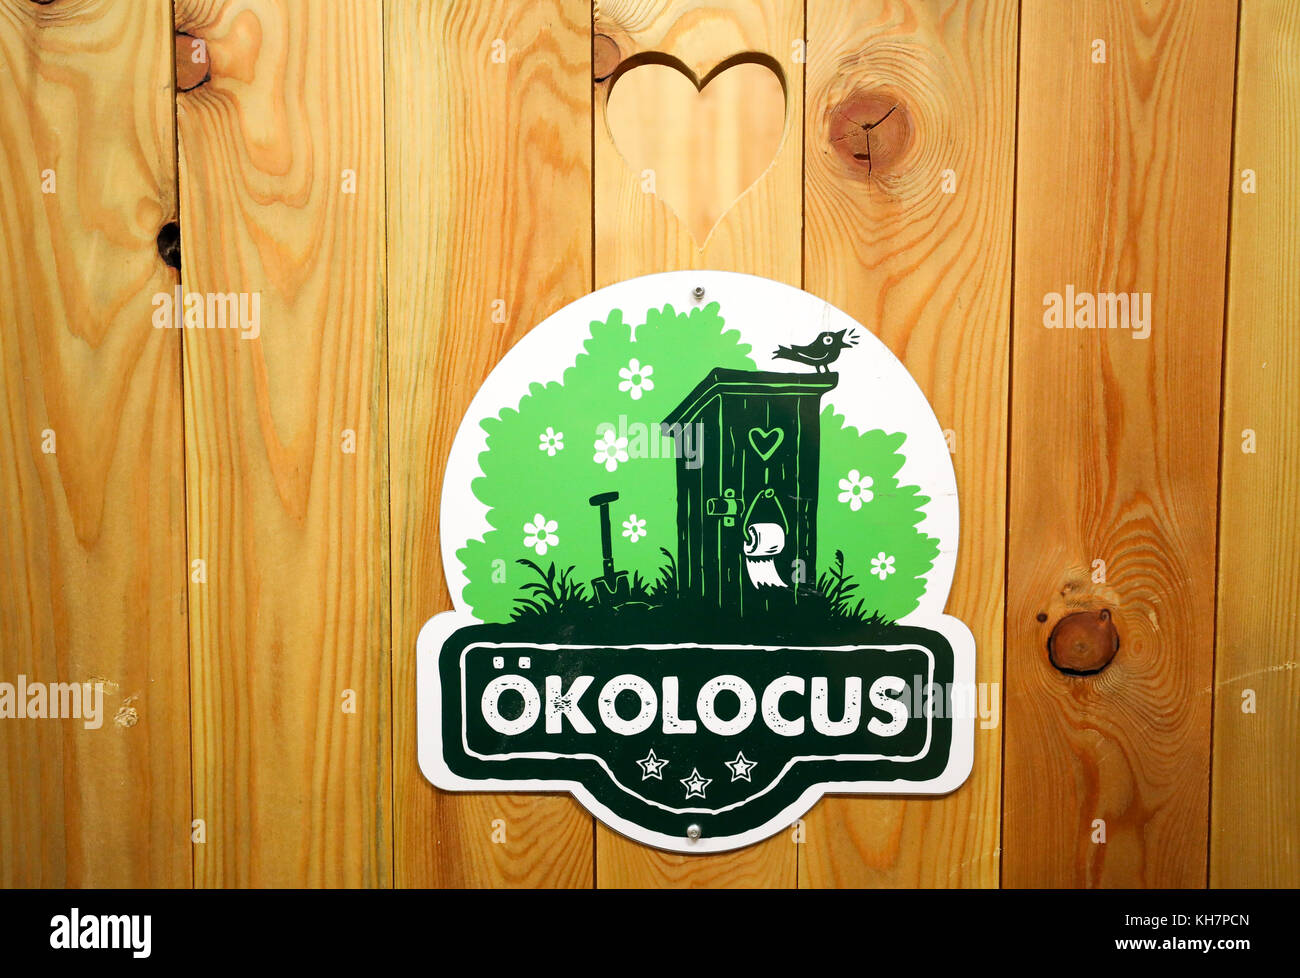 Leipzig, Germany. 13th Nov, 2017. Picture of the door of an outhouse made out of wood, with the de rigeur heart-shaped hole and the company's logo, taken in Leipzig, Germany, 13 November 2017. The toilet services provider Okolocus rents the self-made outhouses for weddings, festivals or for owners of small gardens. People who need to go to the toilet sit on toilet seats made out of wood. Underneath is a plastic drum with a capacity of between 50 and 60 liters. After doing the business a shovelful of wood shavings is thrown into the drum. Okolocus takes care of the disposal of the contents. Cre Stock Photo